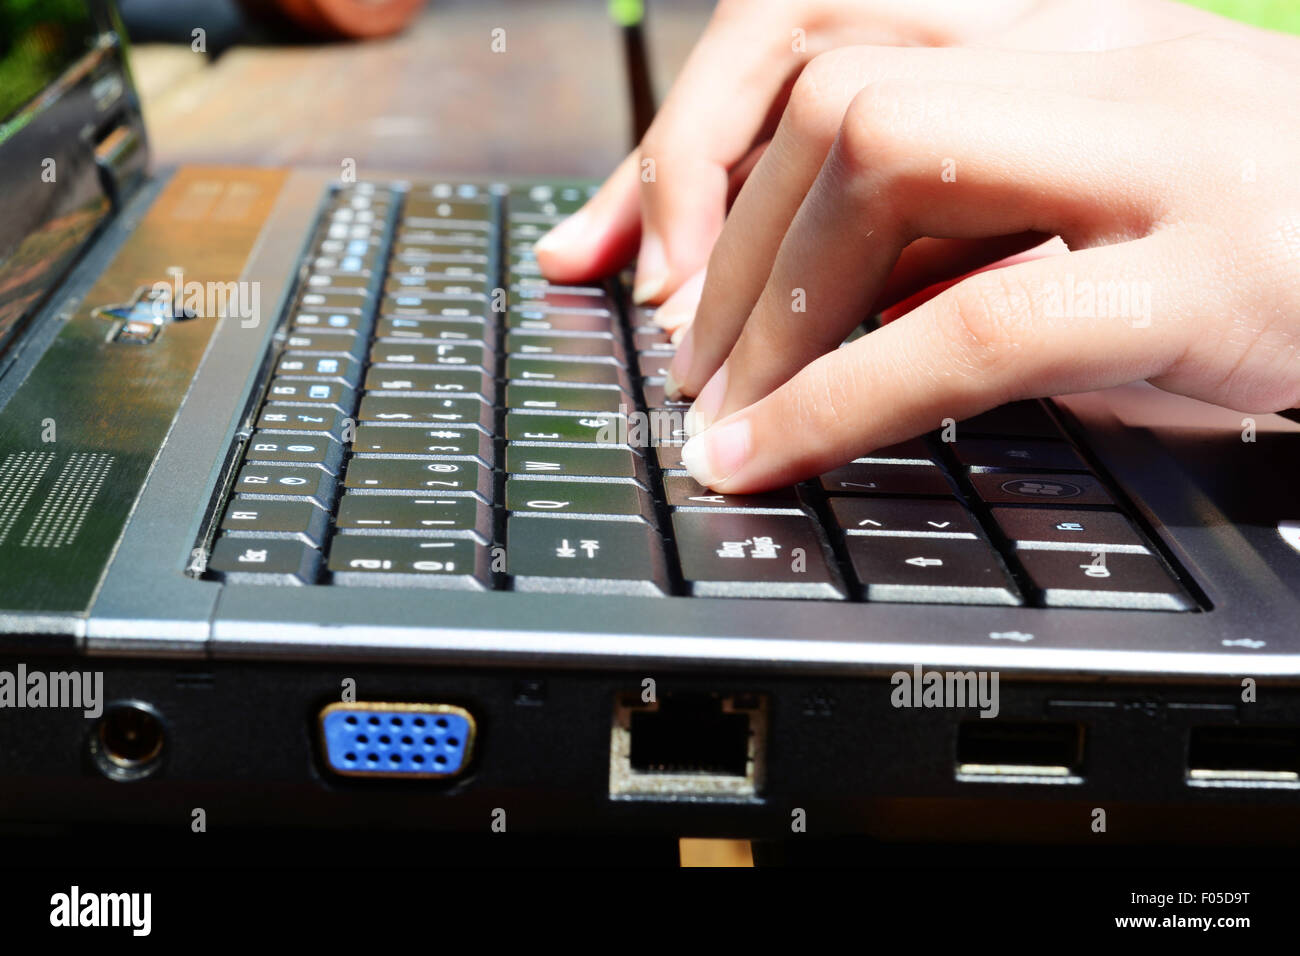 Female hands over a laptop keyboard Stock Photo